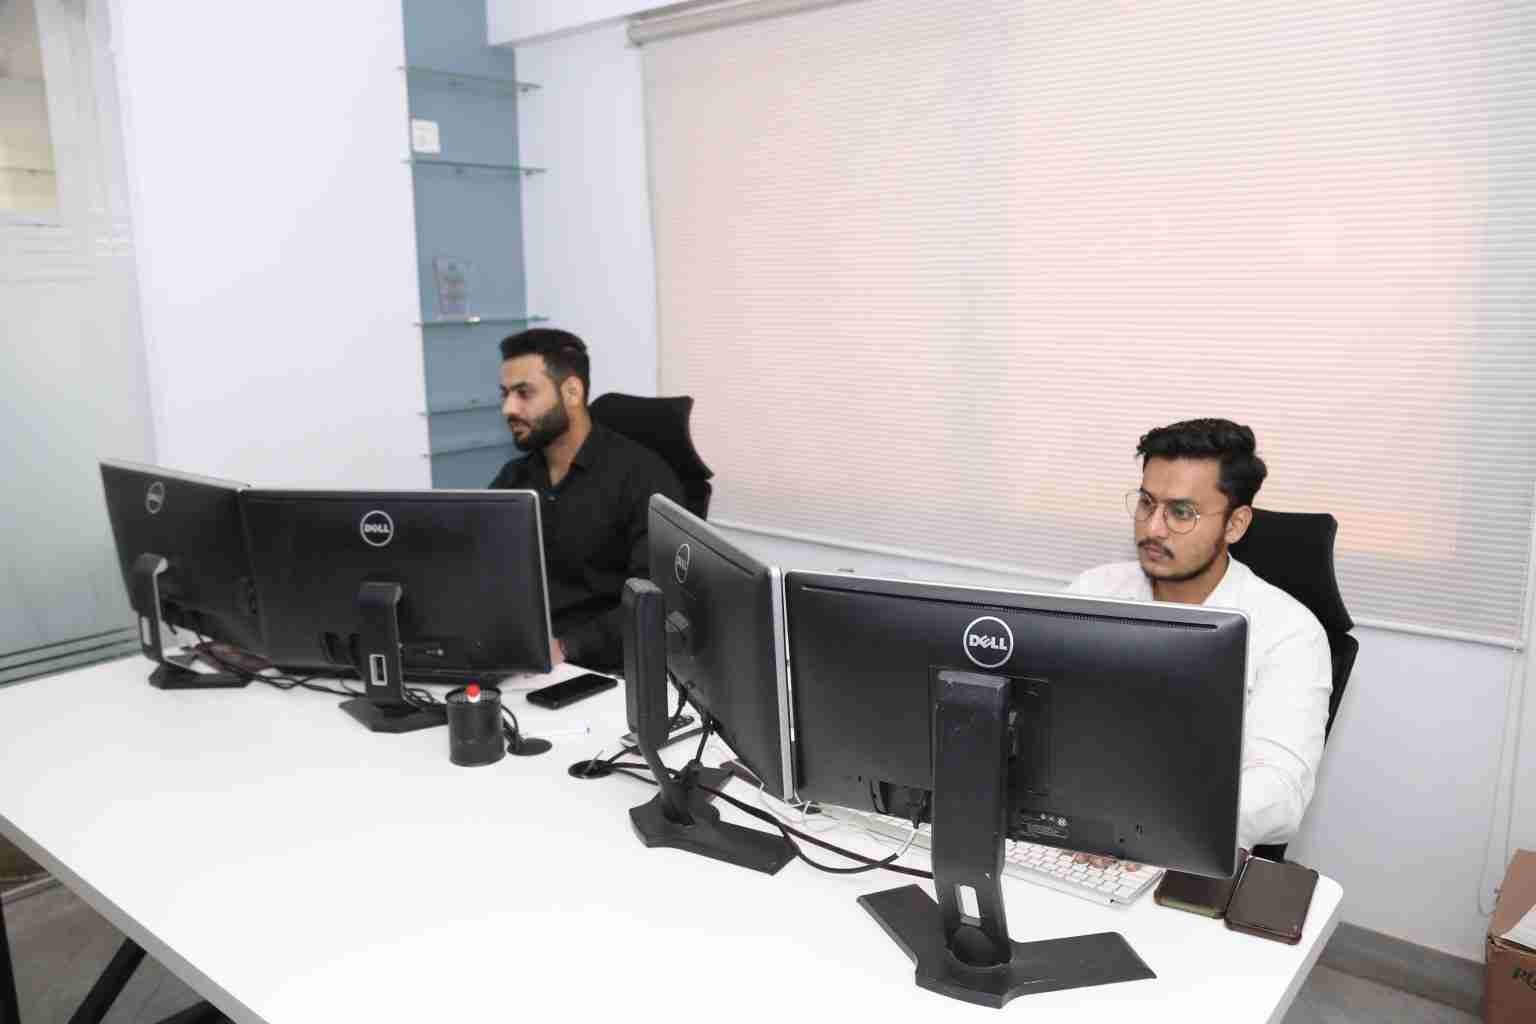 These are our application engineers in our offshore offices